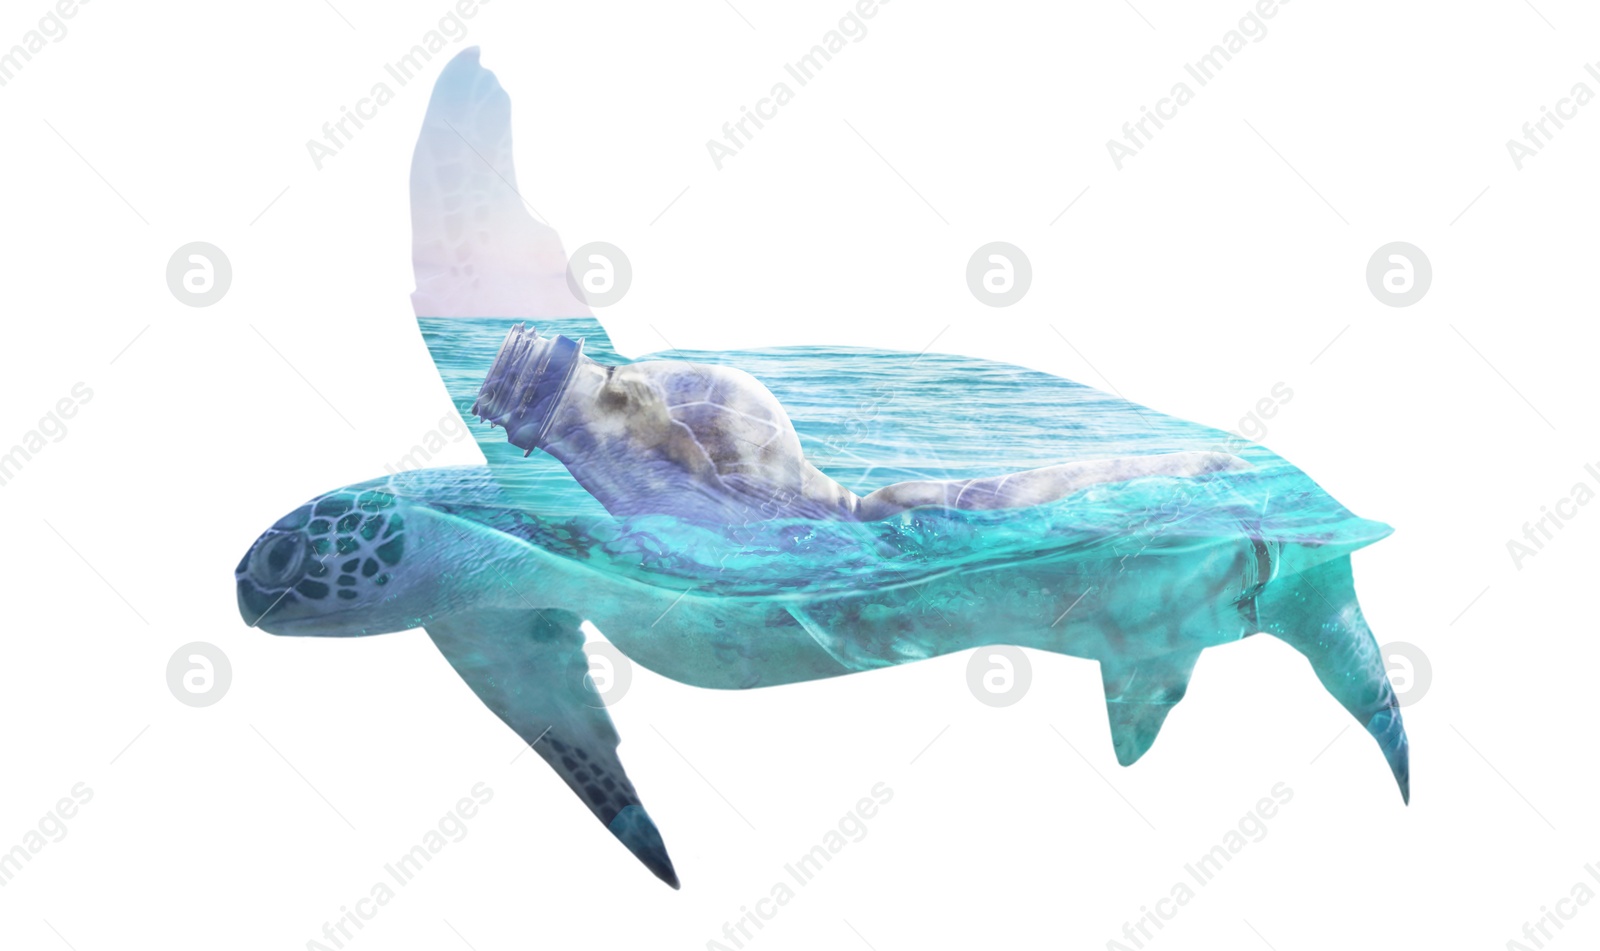 Image of Plastic garbage in ocean and turtle, double exposure. Environmental pollution